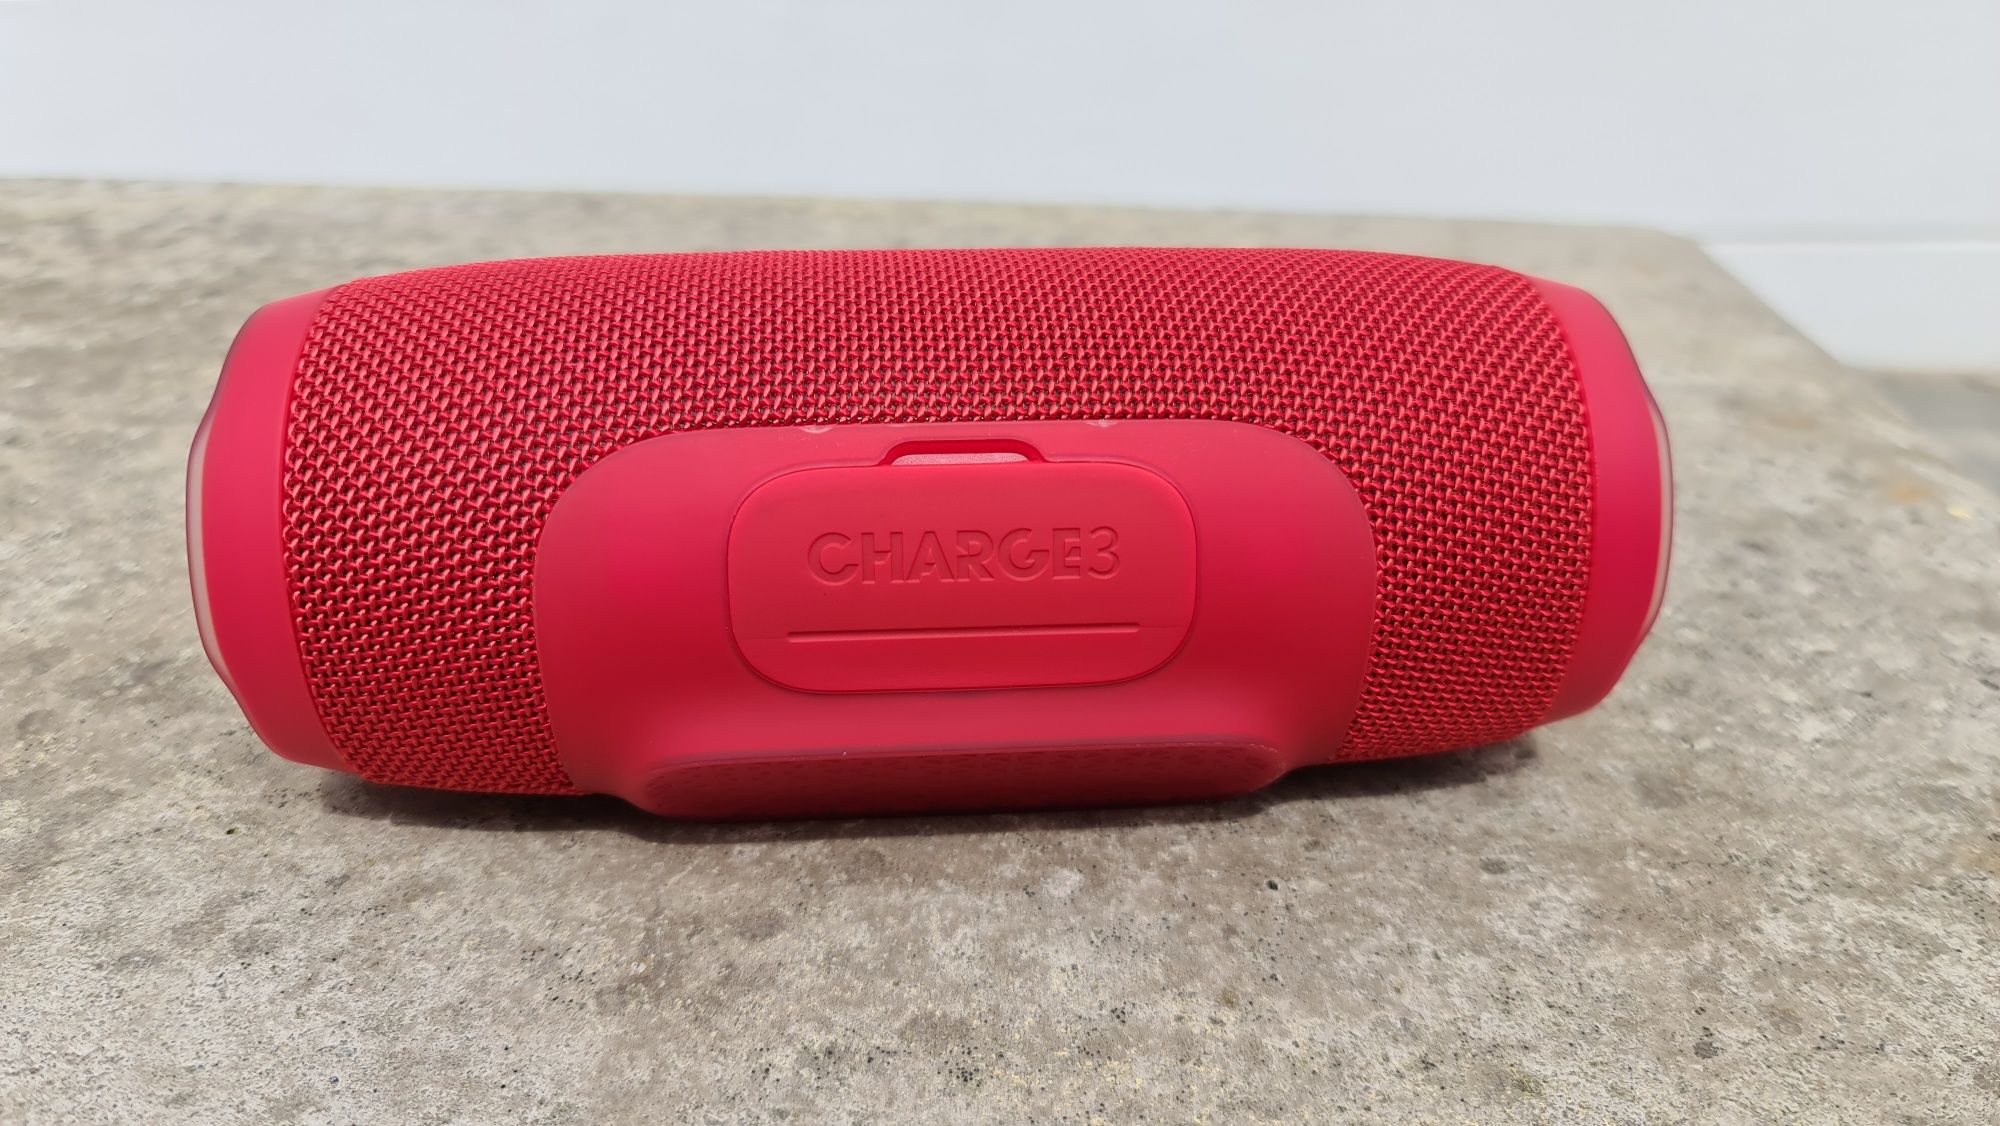 Jbl Charge 3 Red